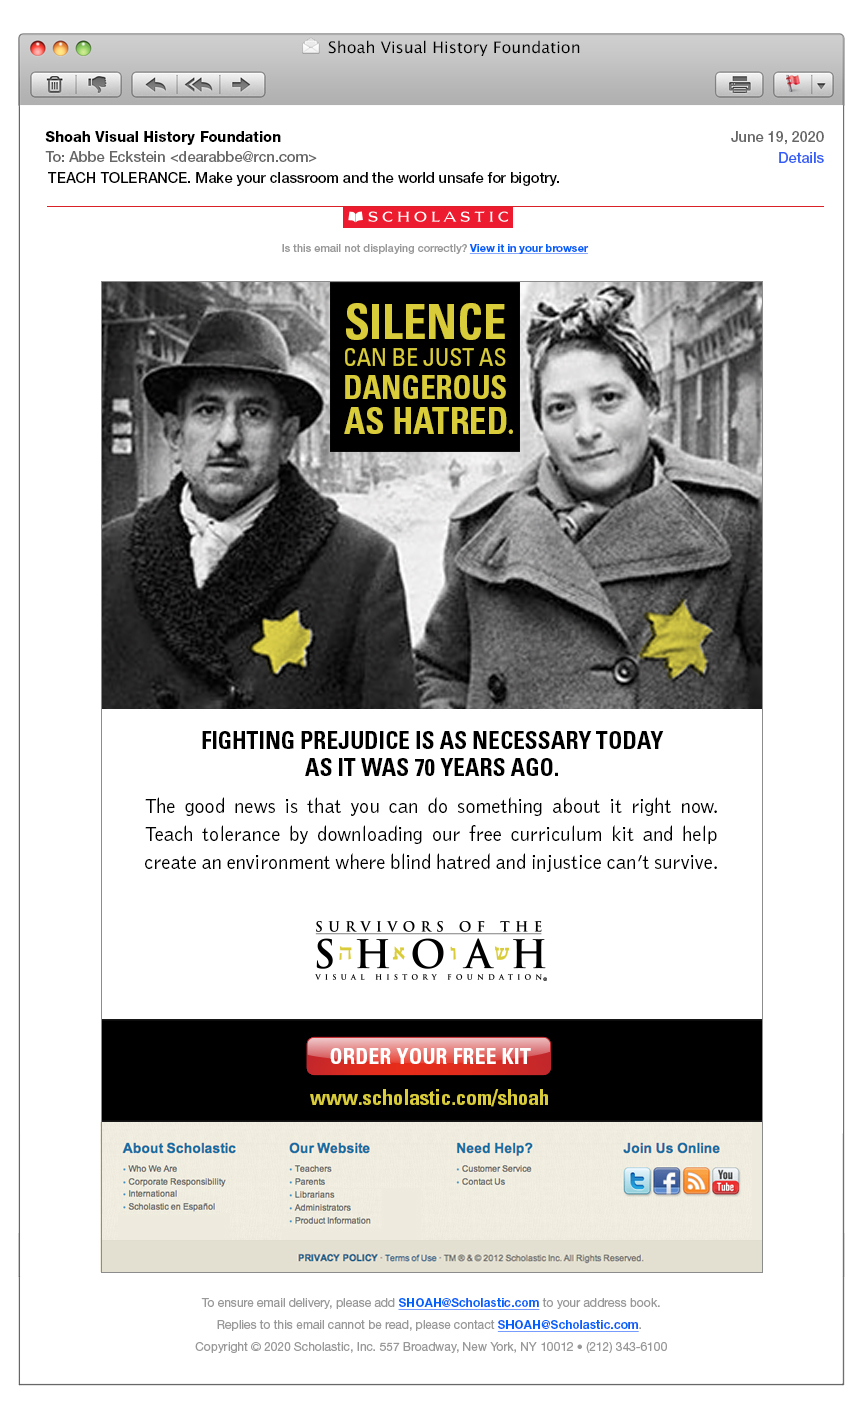 Shoah Foundation Email Concept